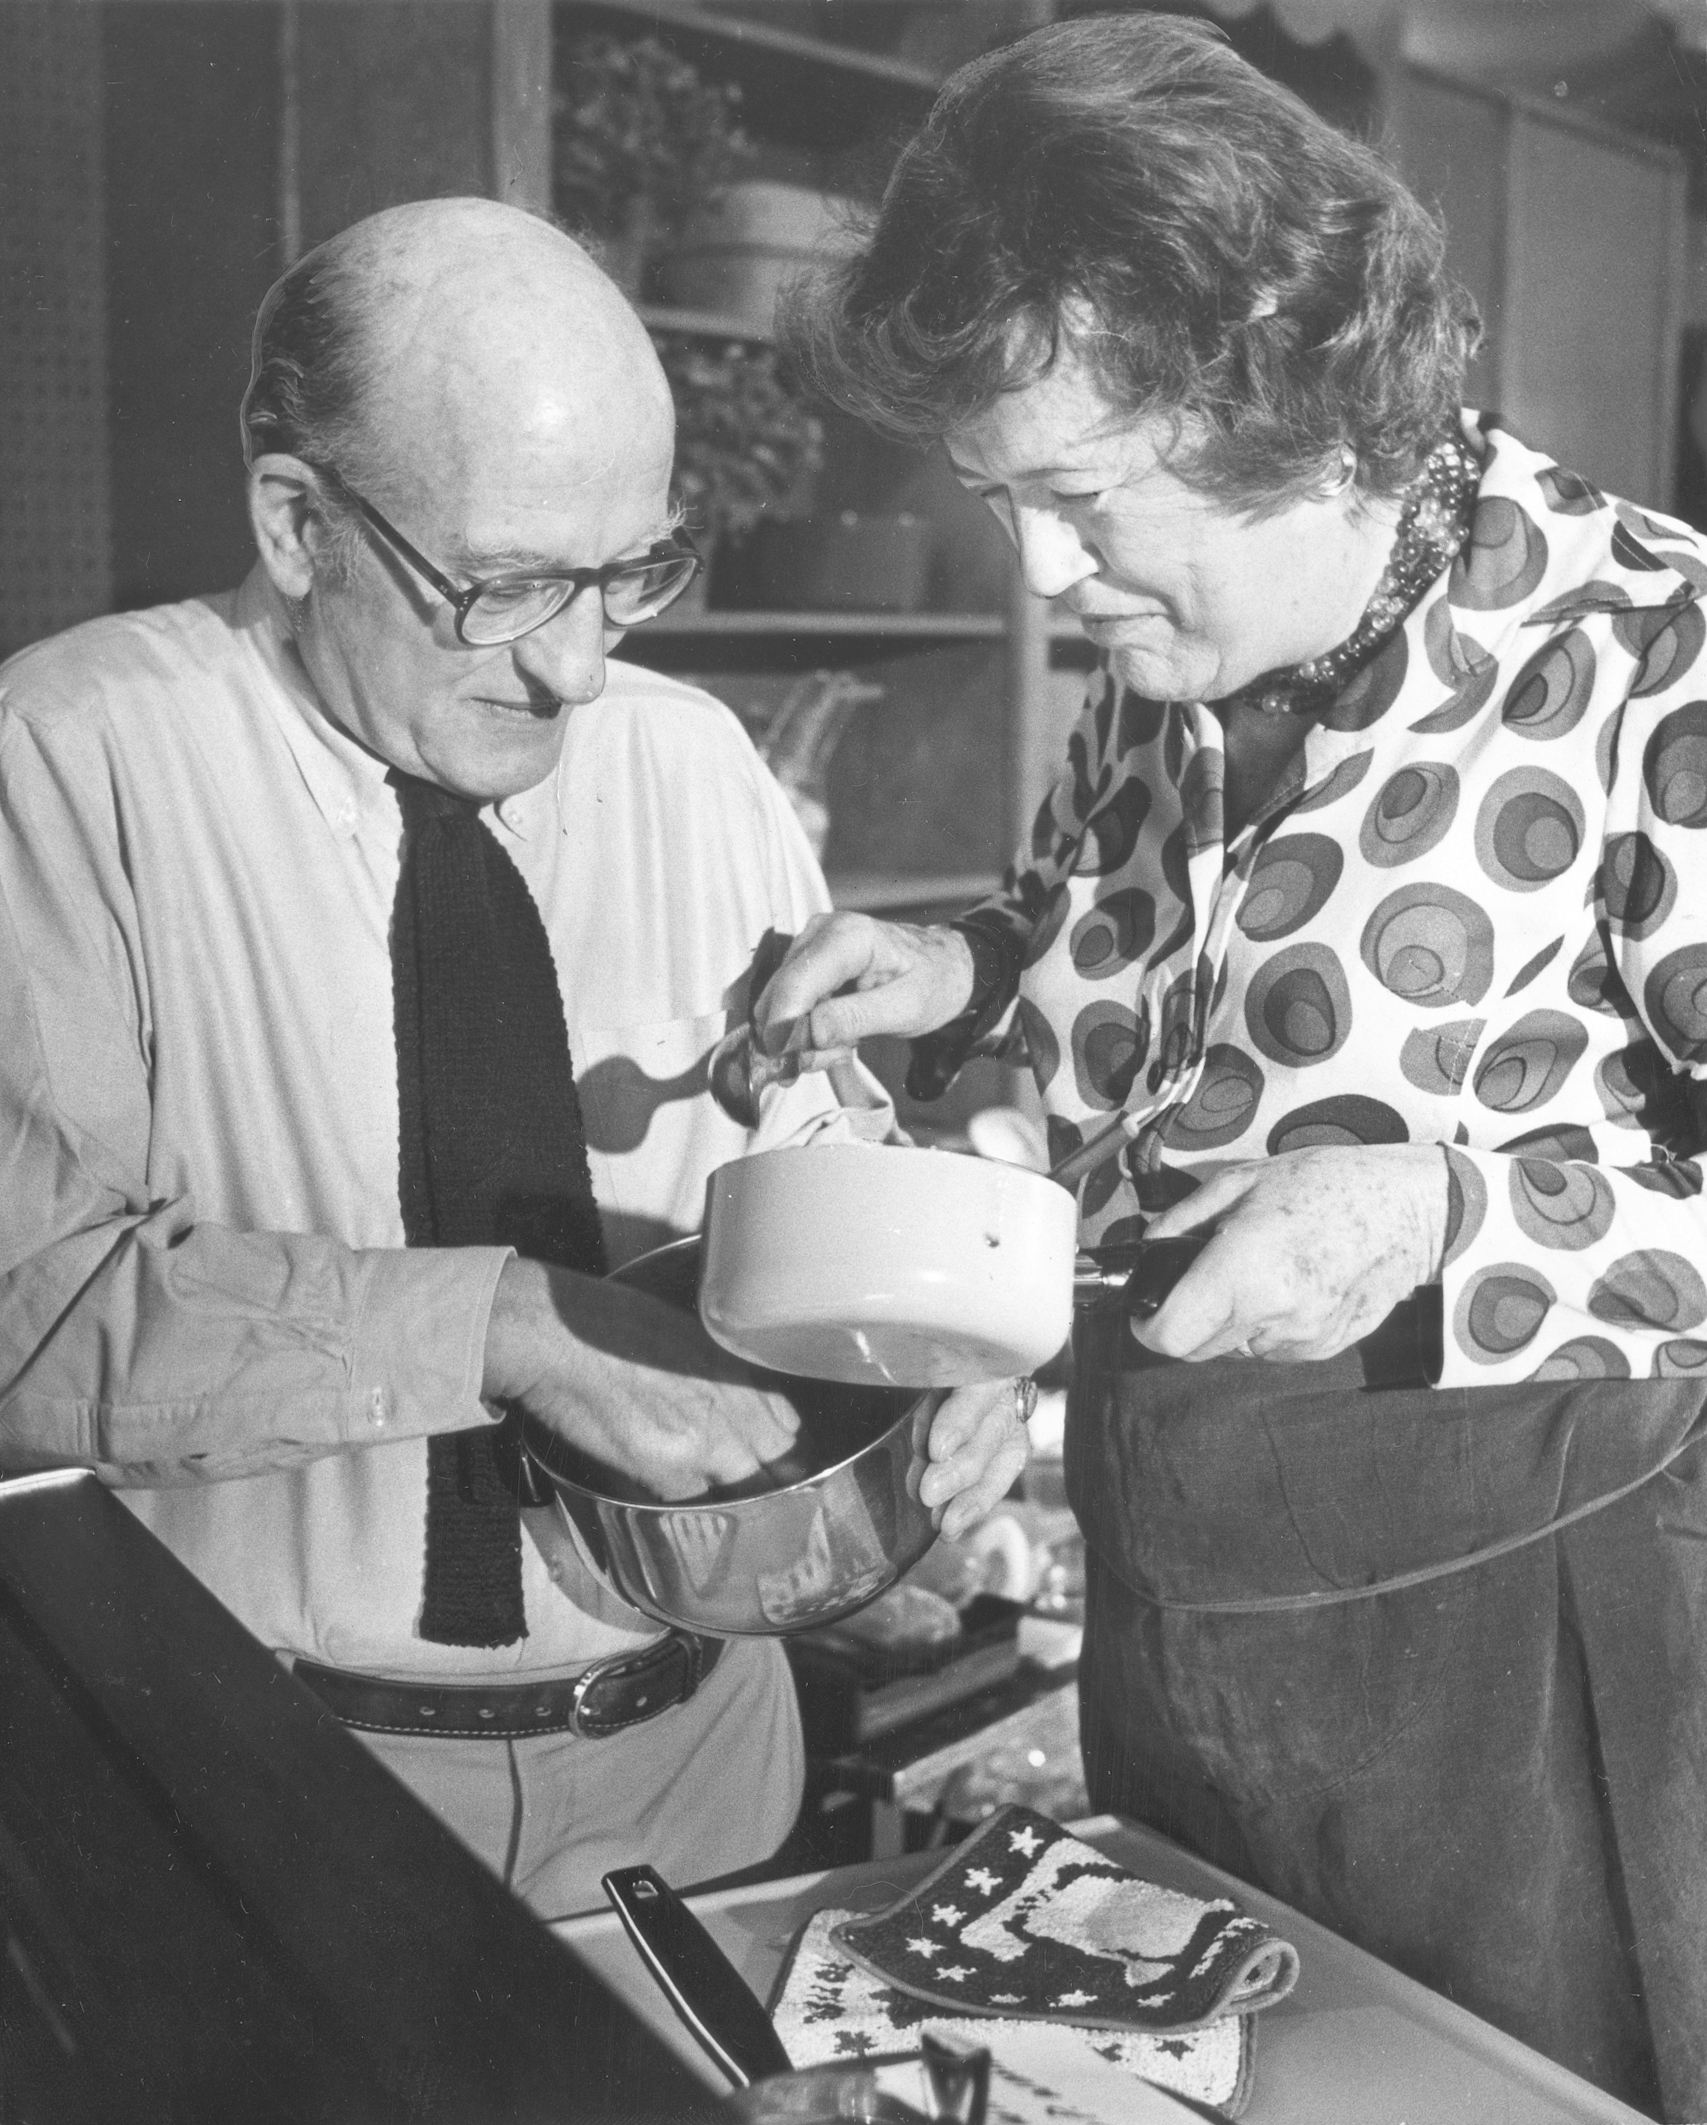 Paul Child and Julia Child are photgraphed during a cooking demonstration at the Shoreham Hotel in 1976